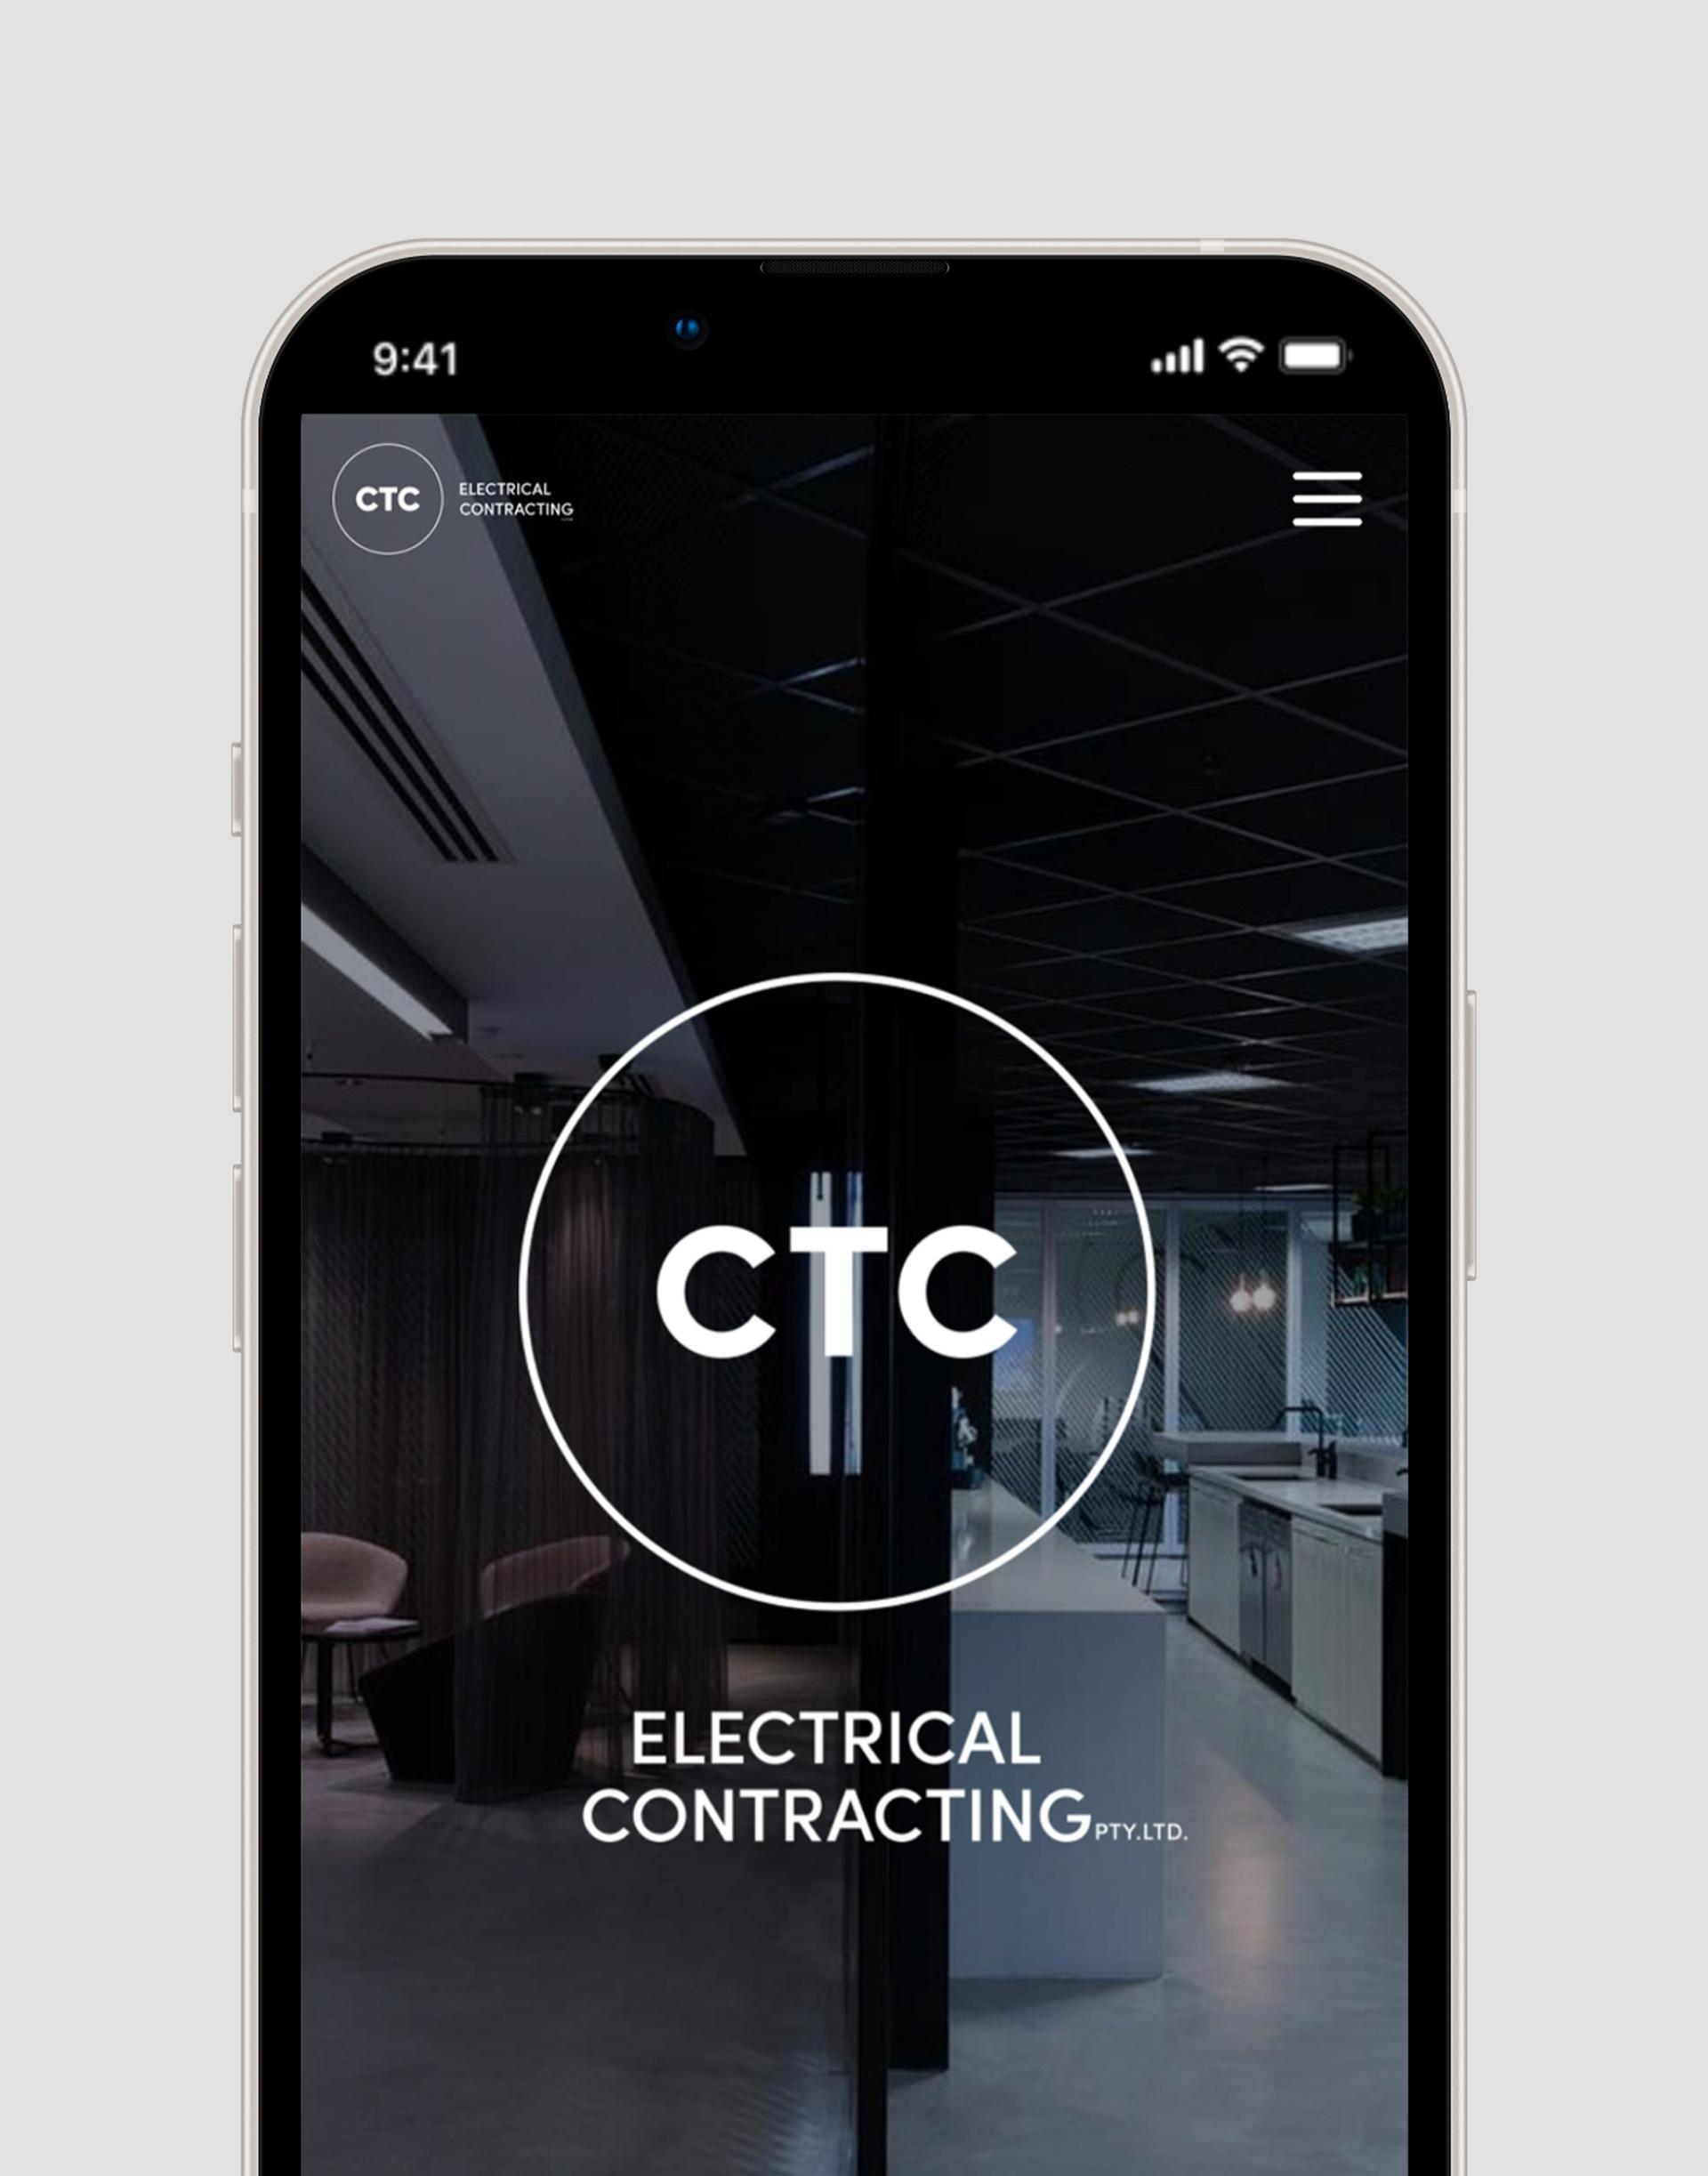 CTC Electrical Contracting hero section displaying the CTC company logo and menu icon. 